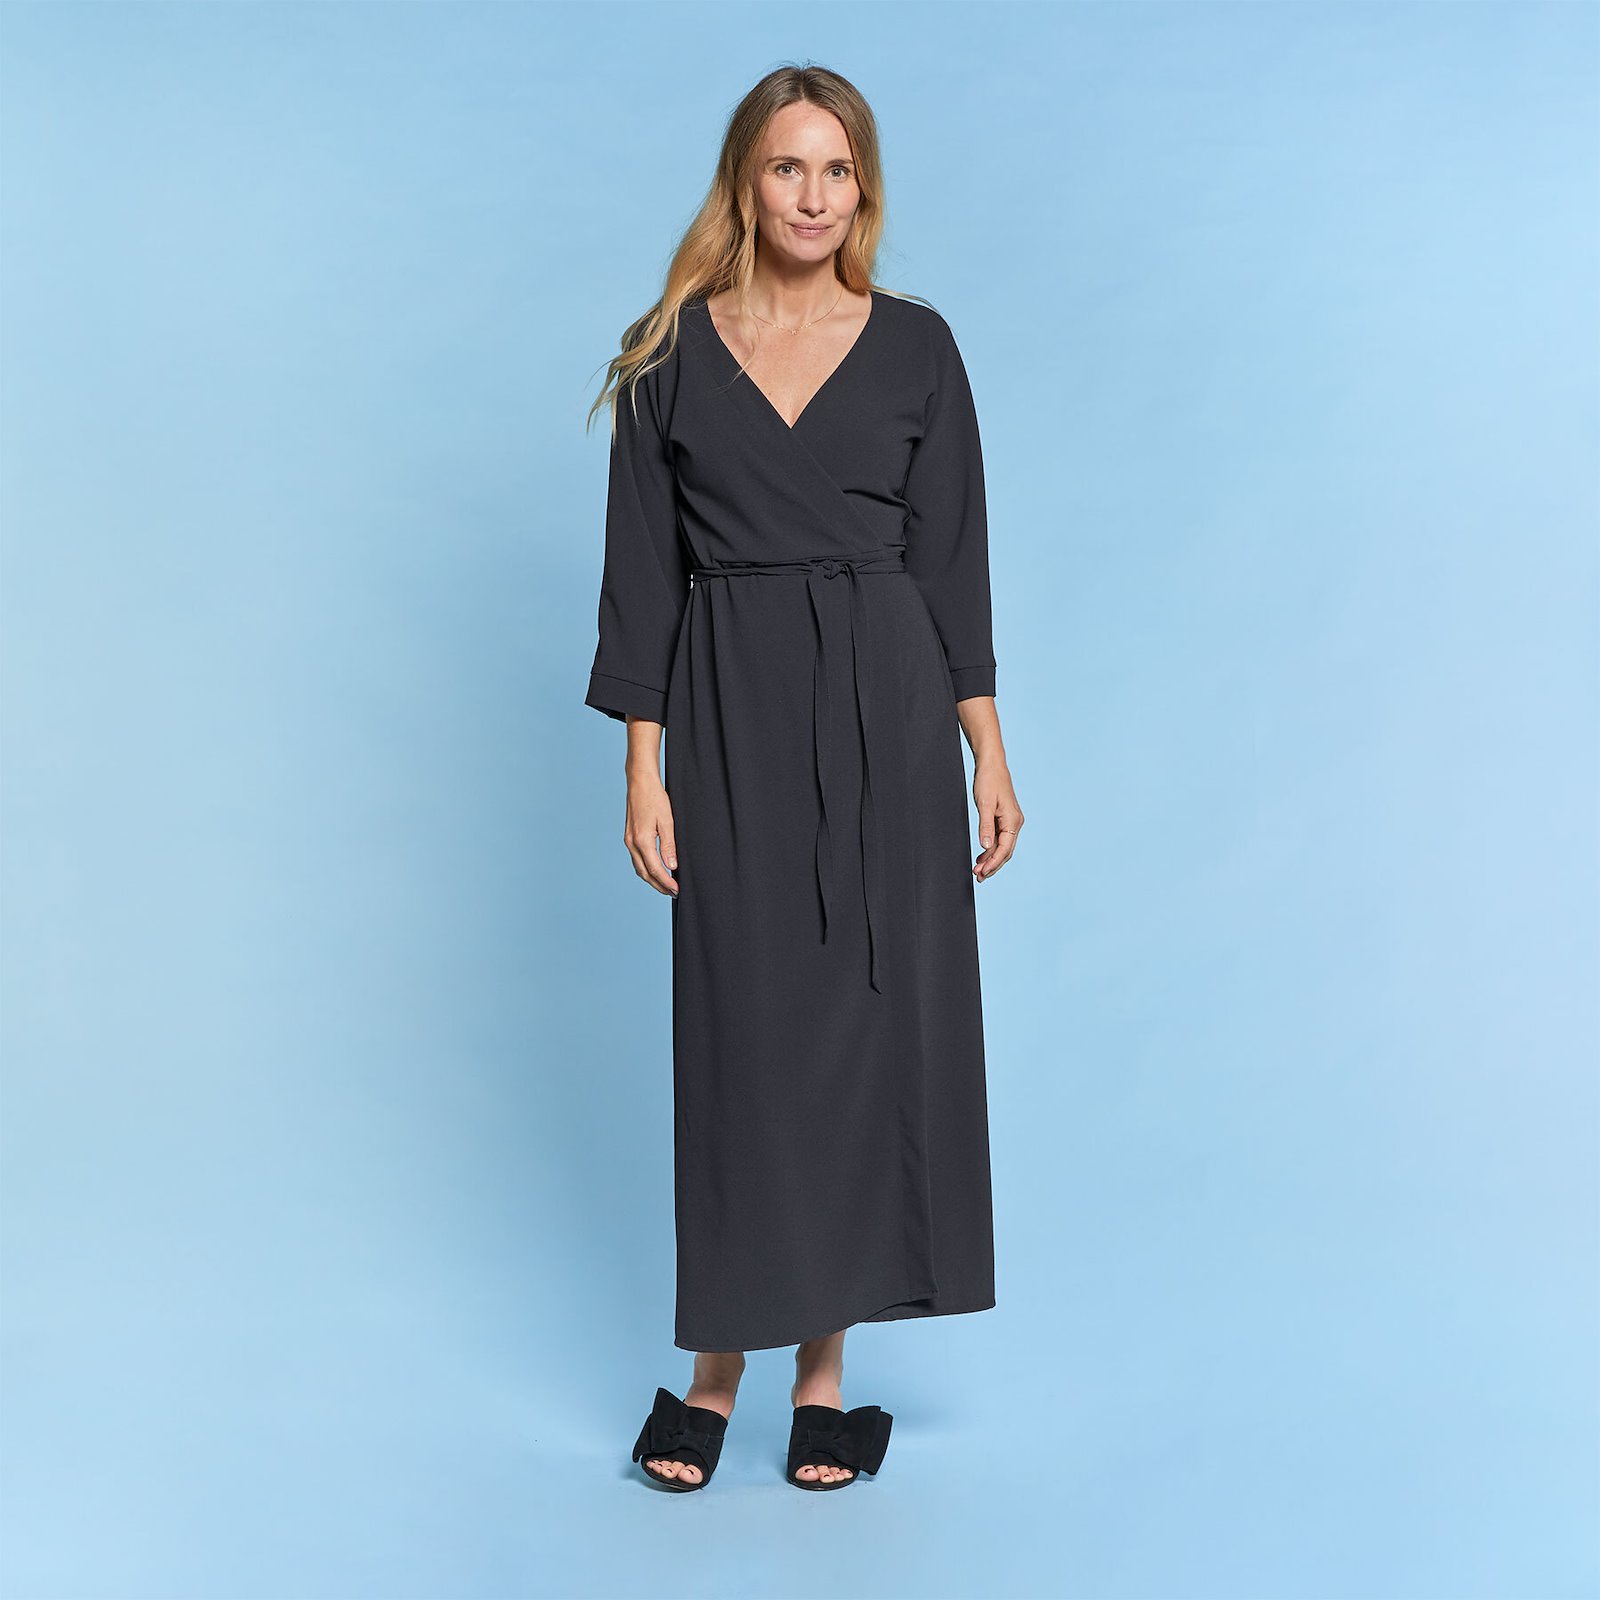 Wrap dress with batwing sleeves, 46/18 p23162000_p23162001_p23162002_p23162003_p23162004_pack_d